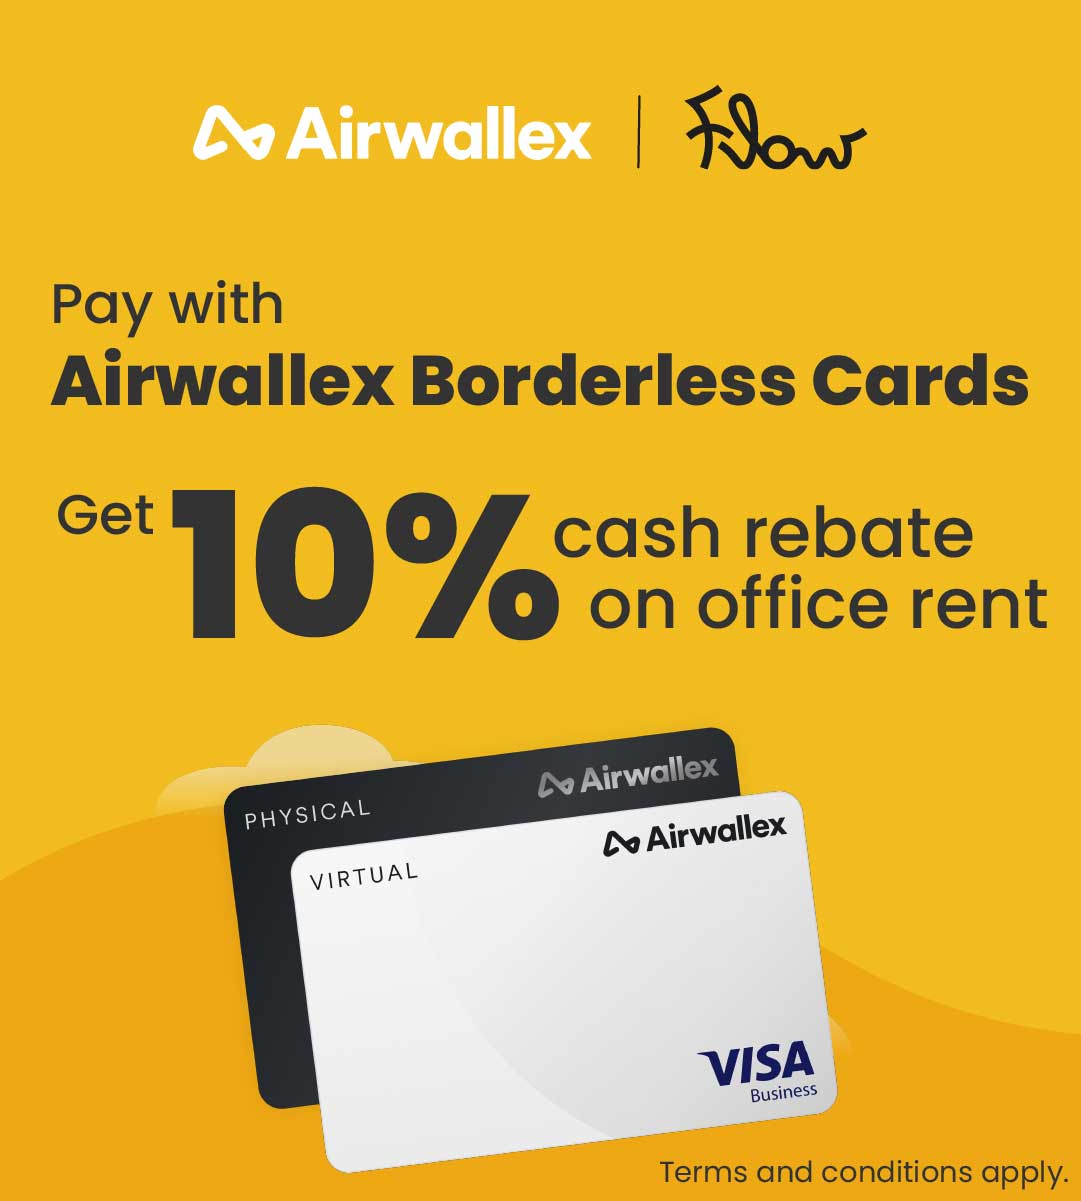 Pay with Airwallex: Earn up to $3,000 in cash rebates!